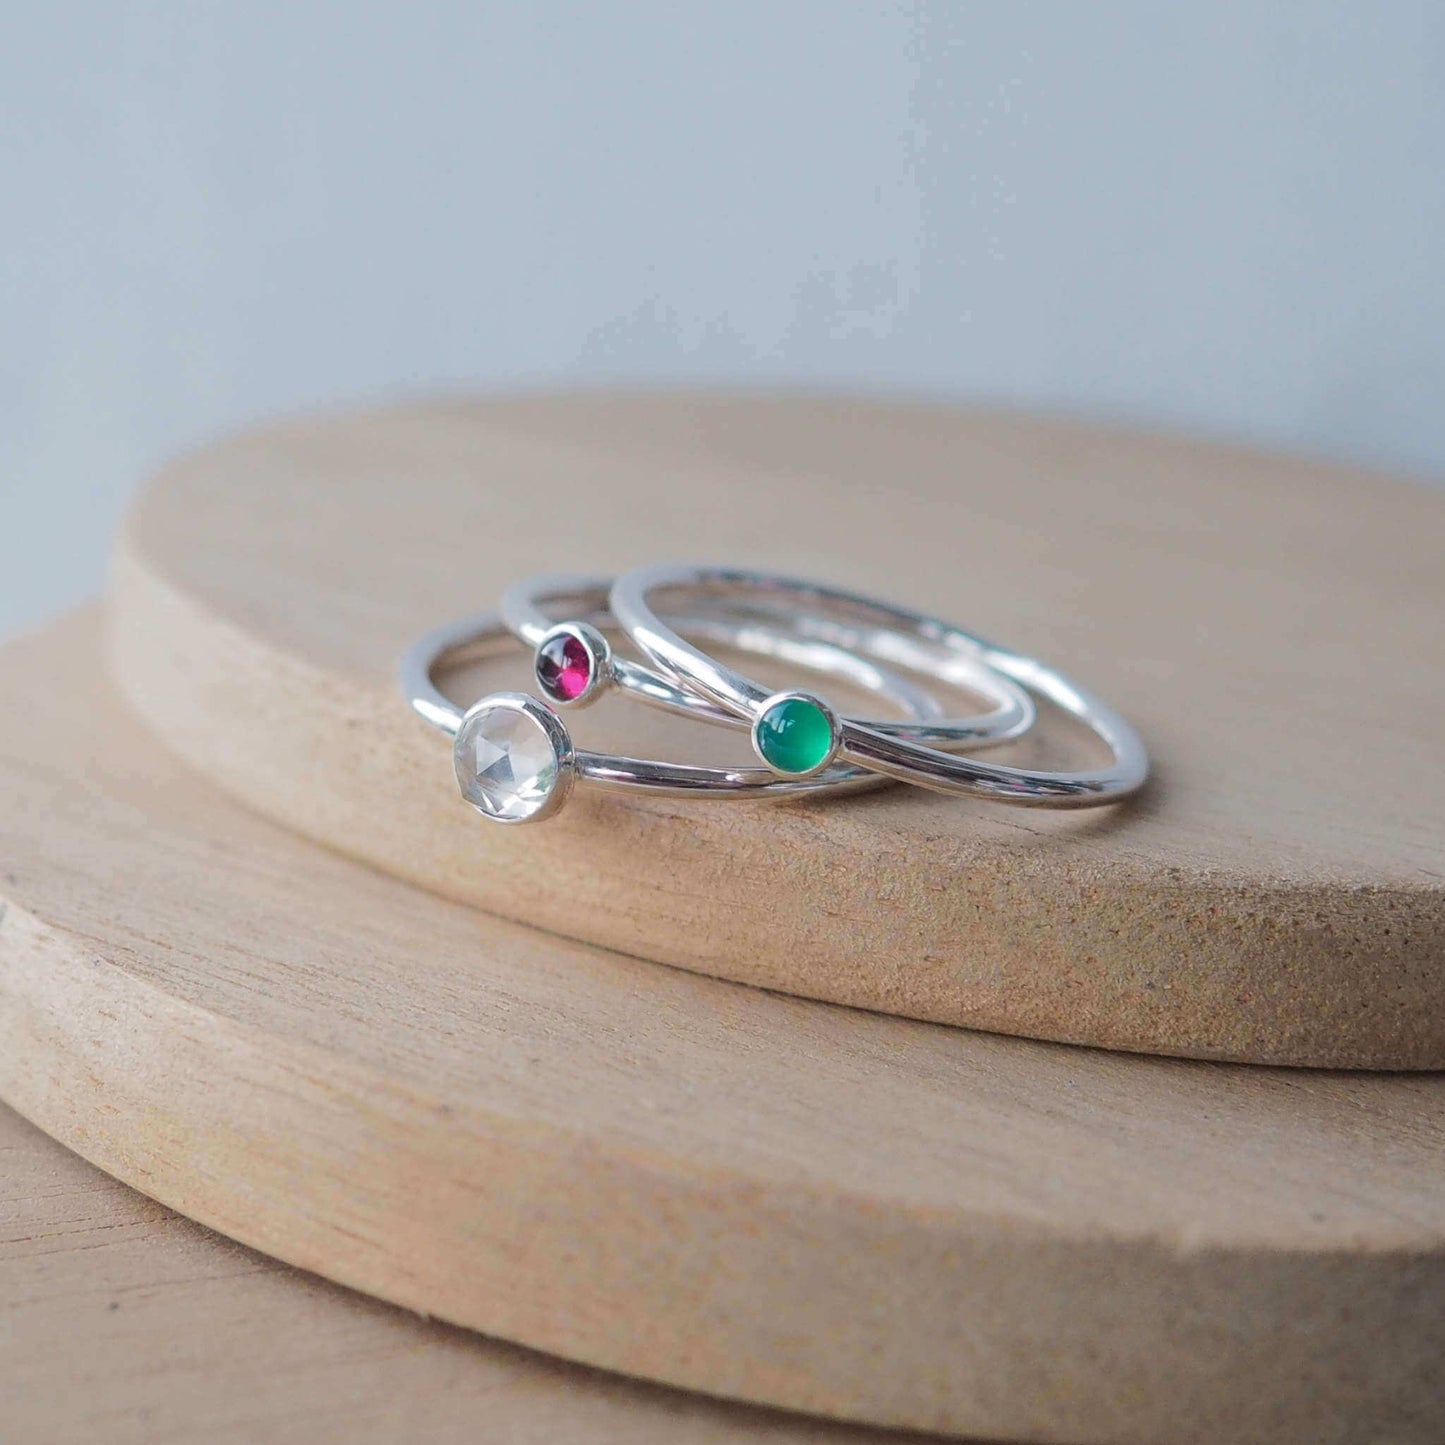 Three Silver Ring Birthstone set with April, January and May Birthstones. The set has three round cabochon stones, a 5mm round faceted clear white topaz, a 3mm green agate and a 3mm dark red garnet. Handmade in Scotland by Maram Jewellery